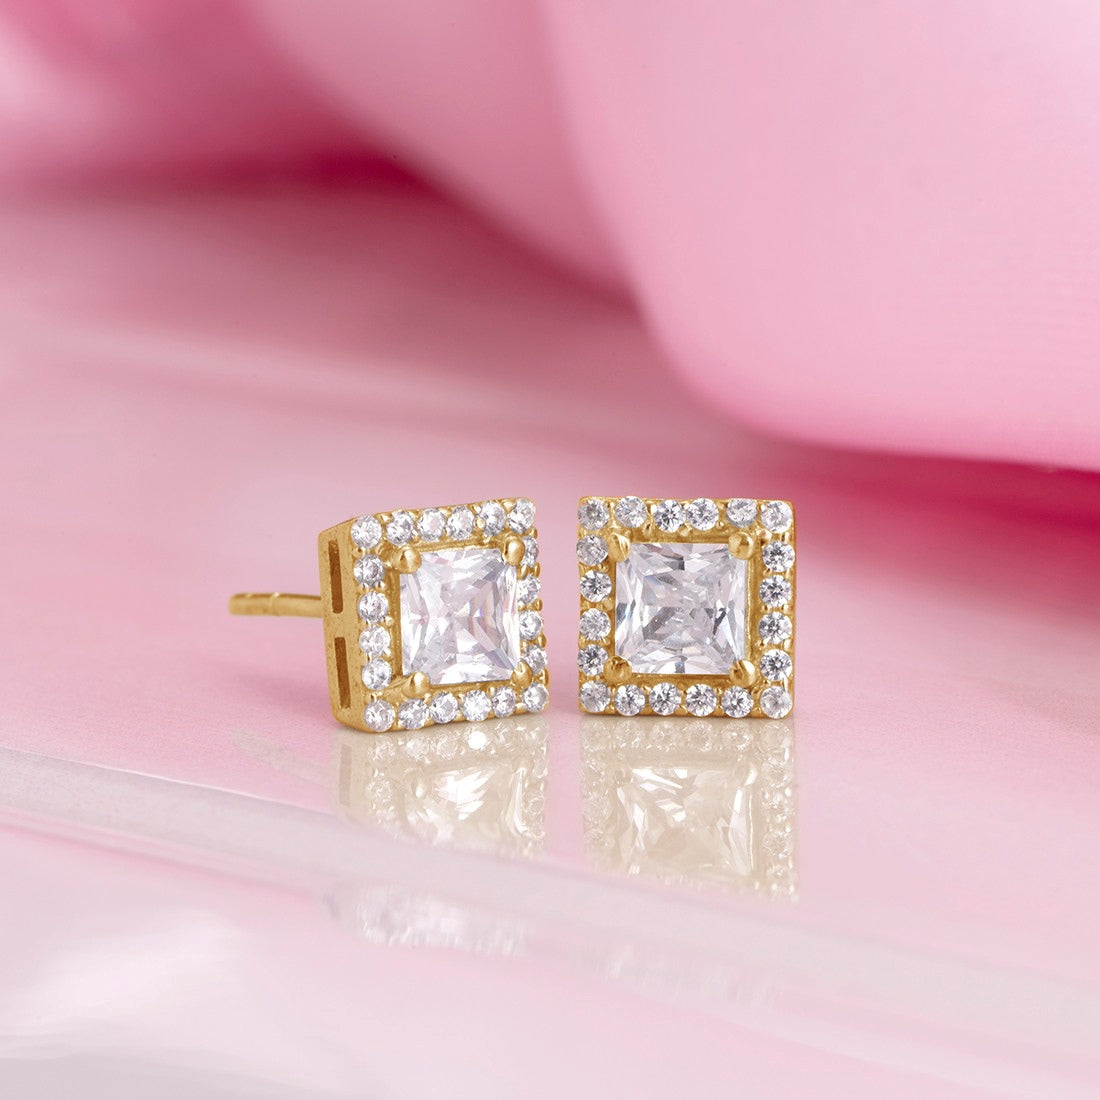 Golden Elegance 925 Sterling Silver Gold-Plated Square Stud Earrings